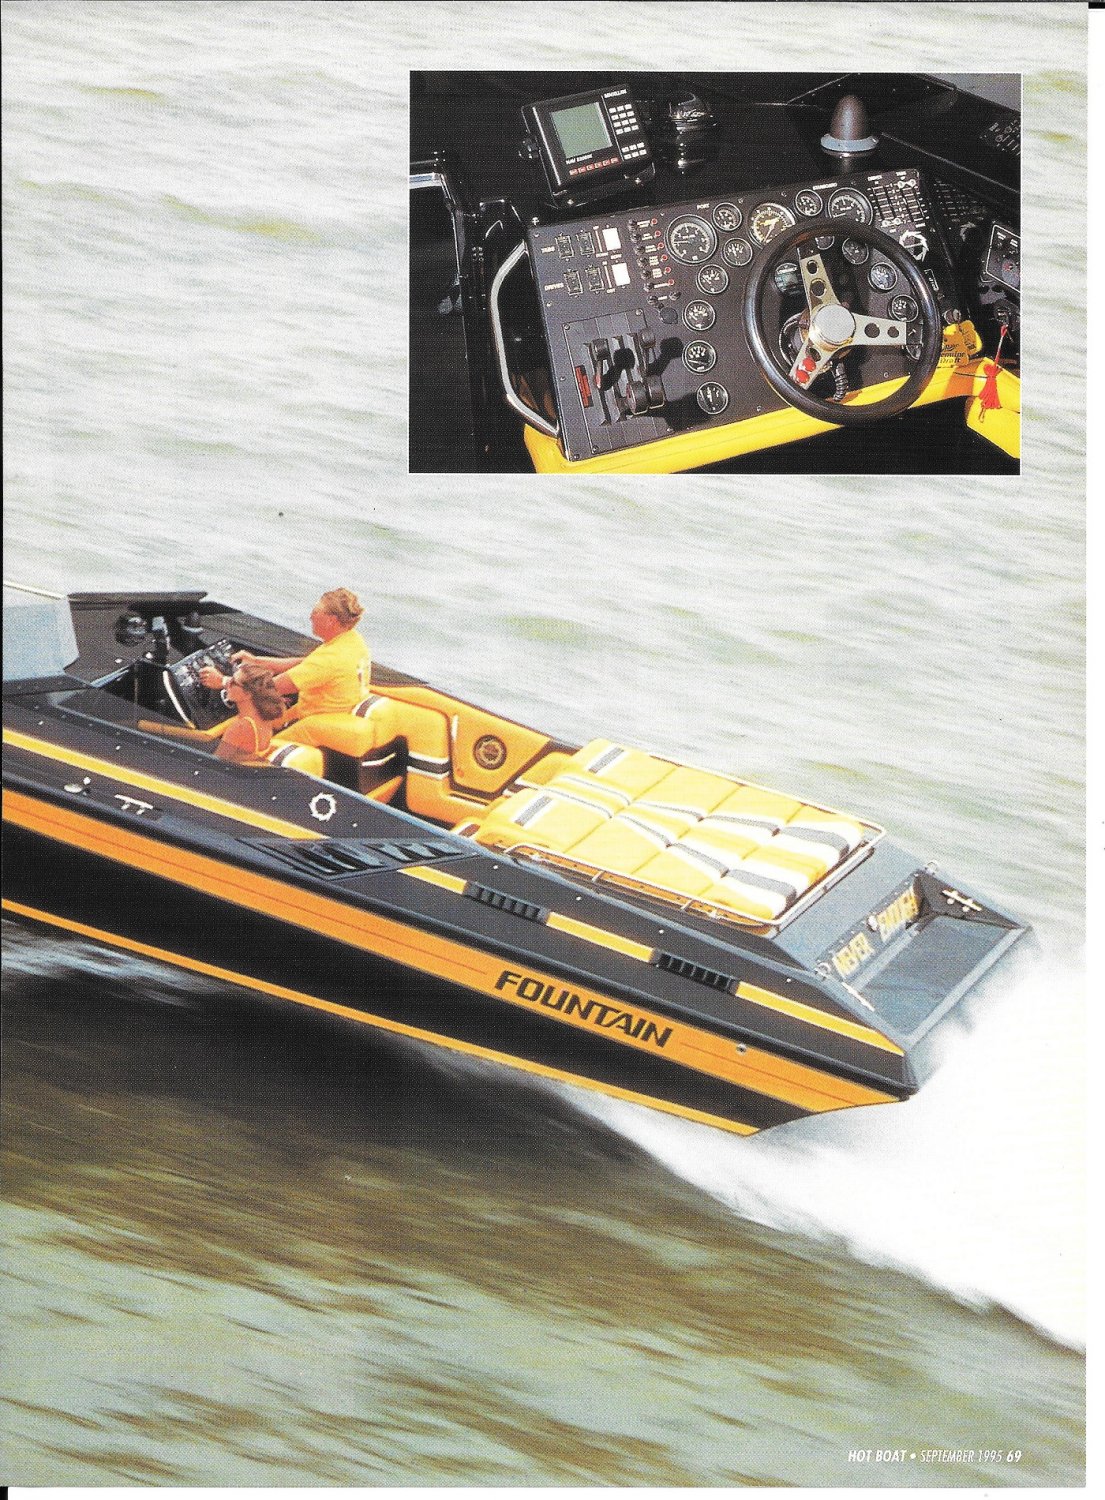 1995 Fountain Powerboat Review- Nice Photos